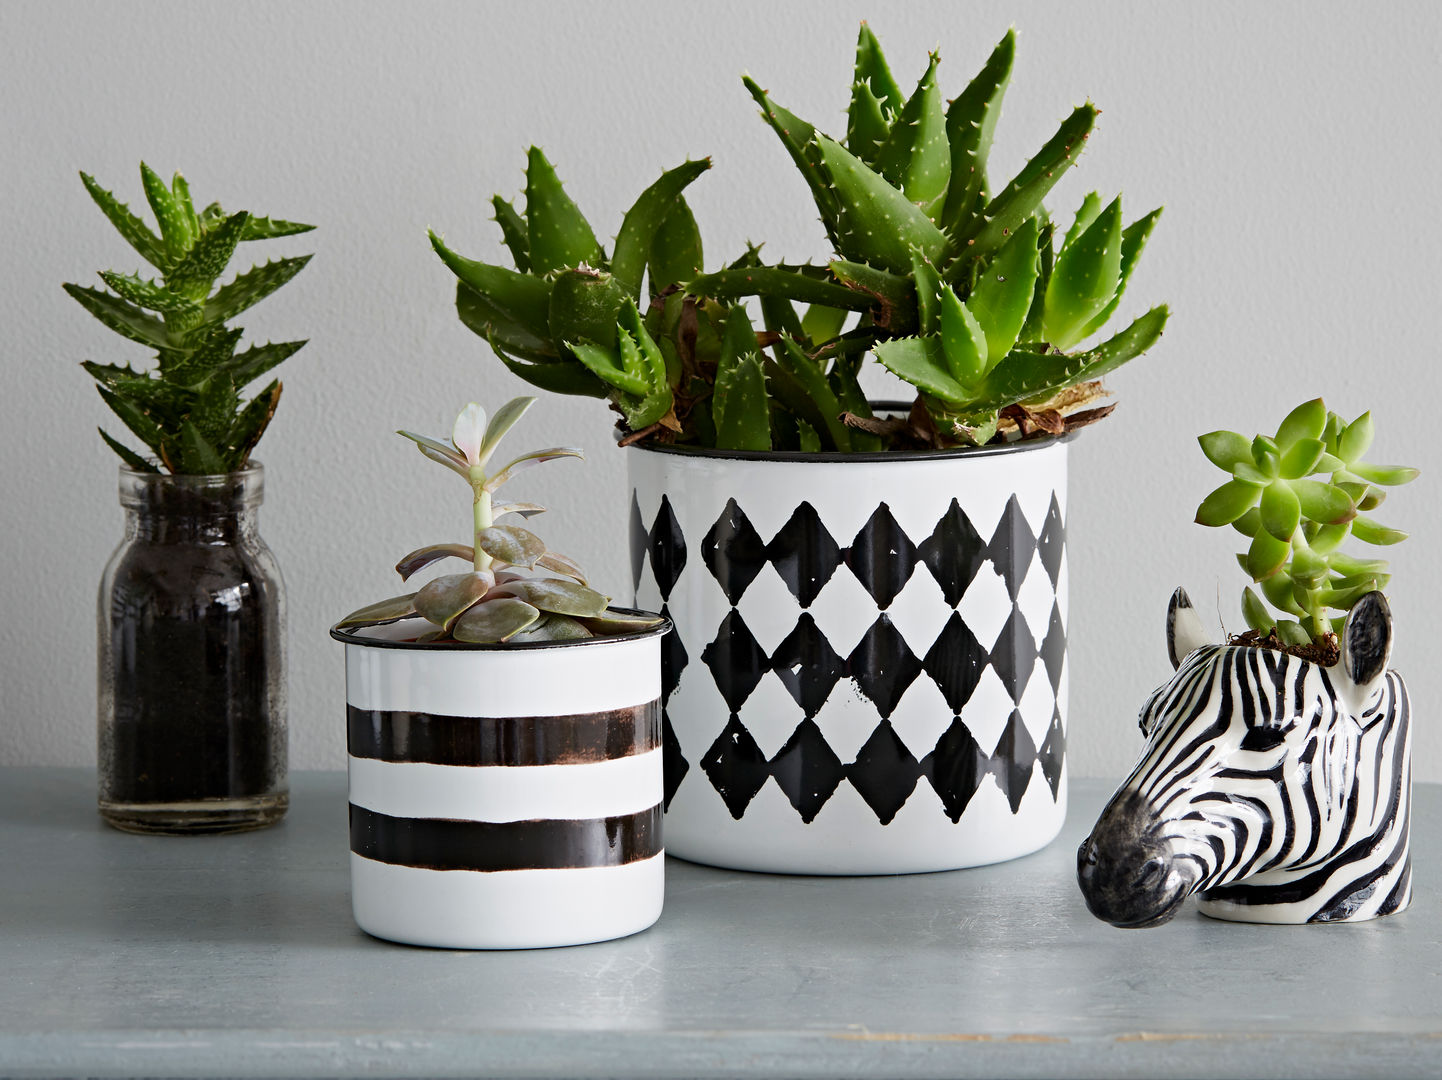 Black and White Enamel Pot rigby & mac Eclectic style houses Homewares